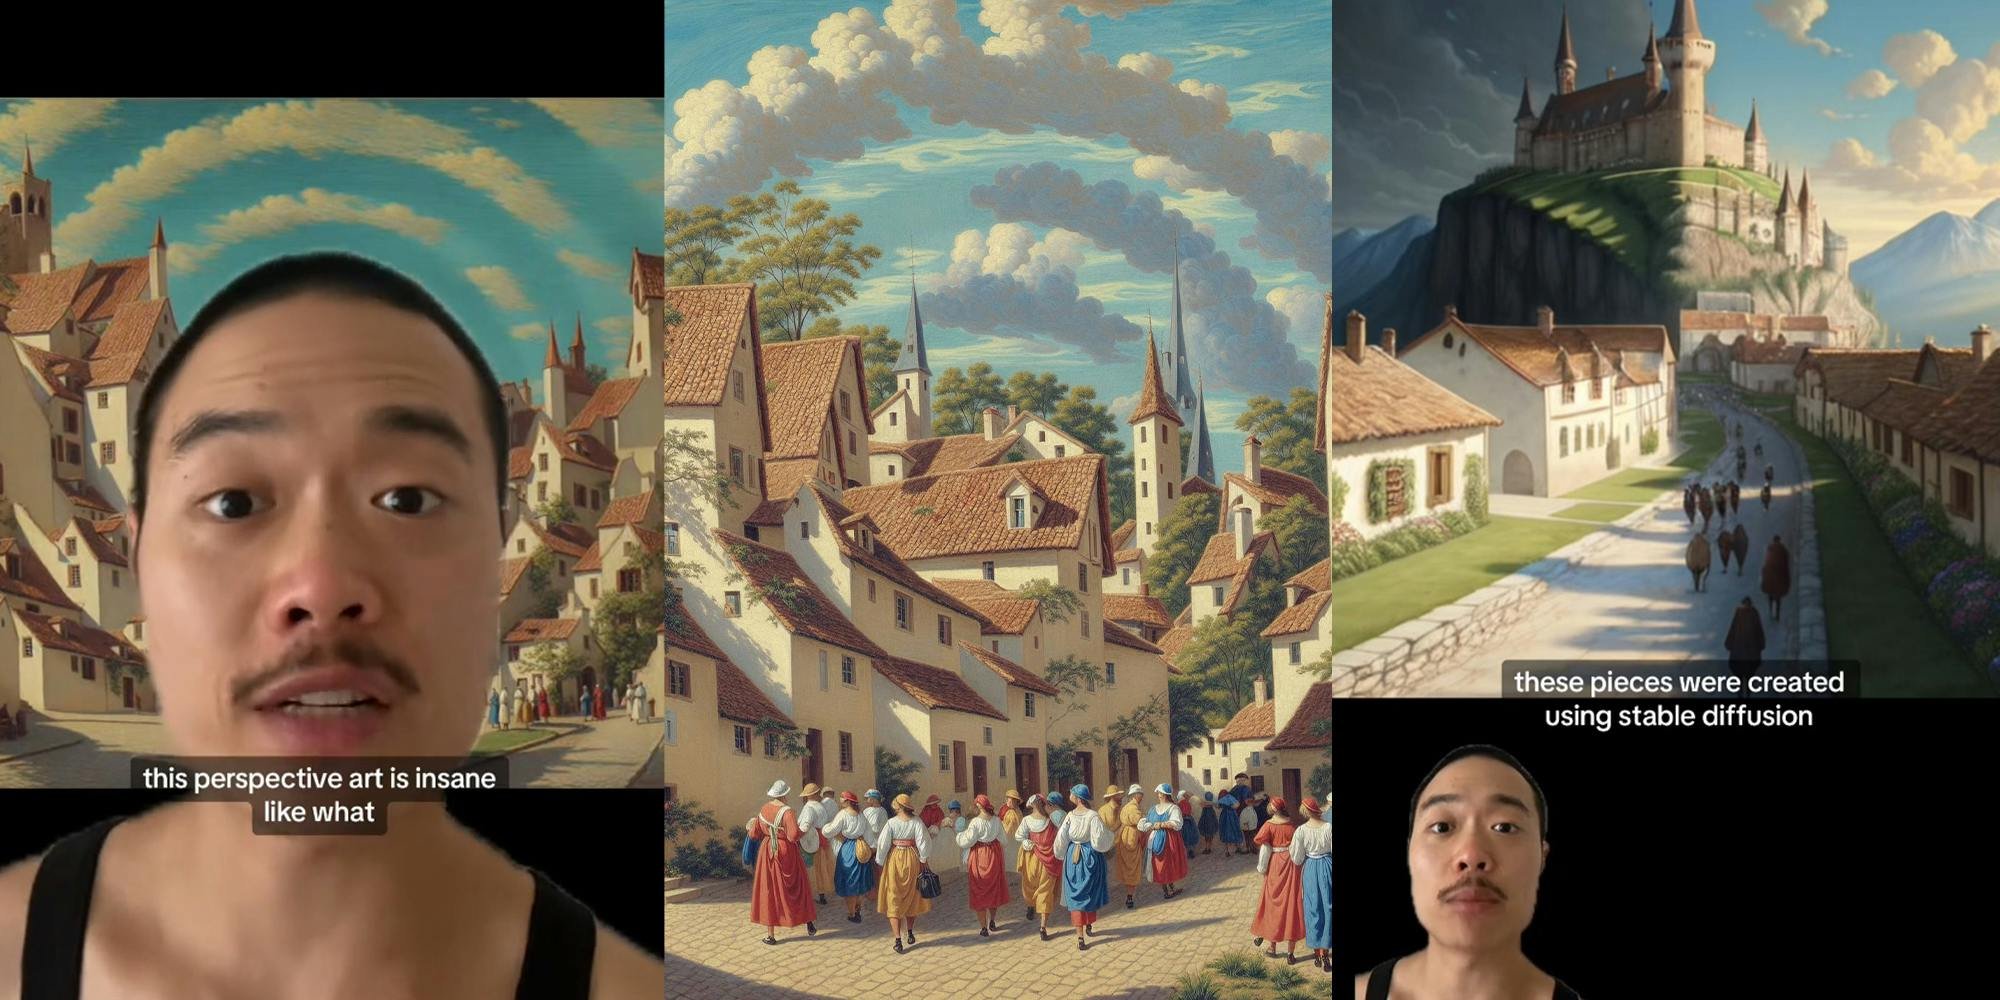 Viral 'Spiral Town' painting sparks controversy over AI art